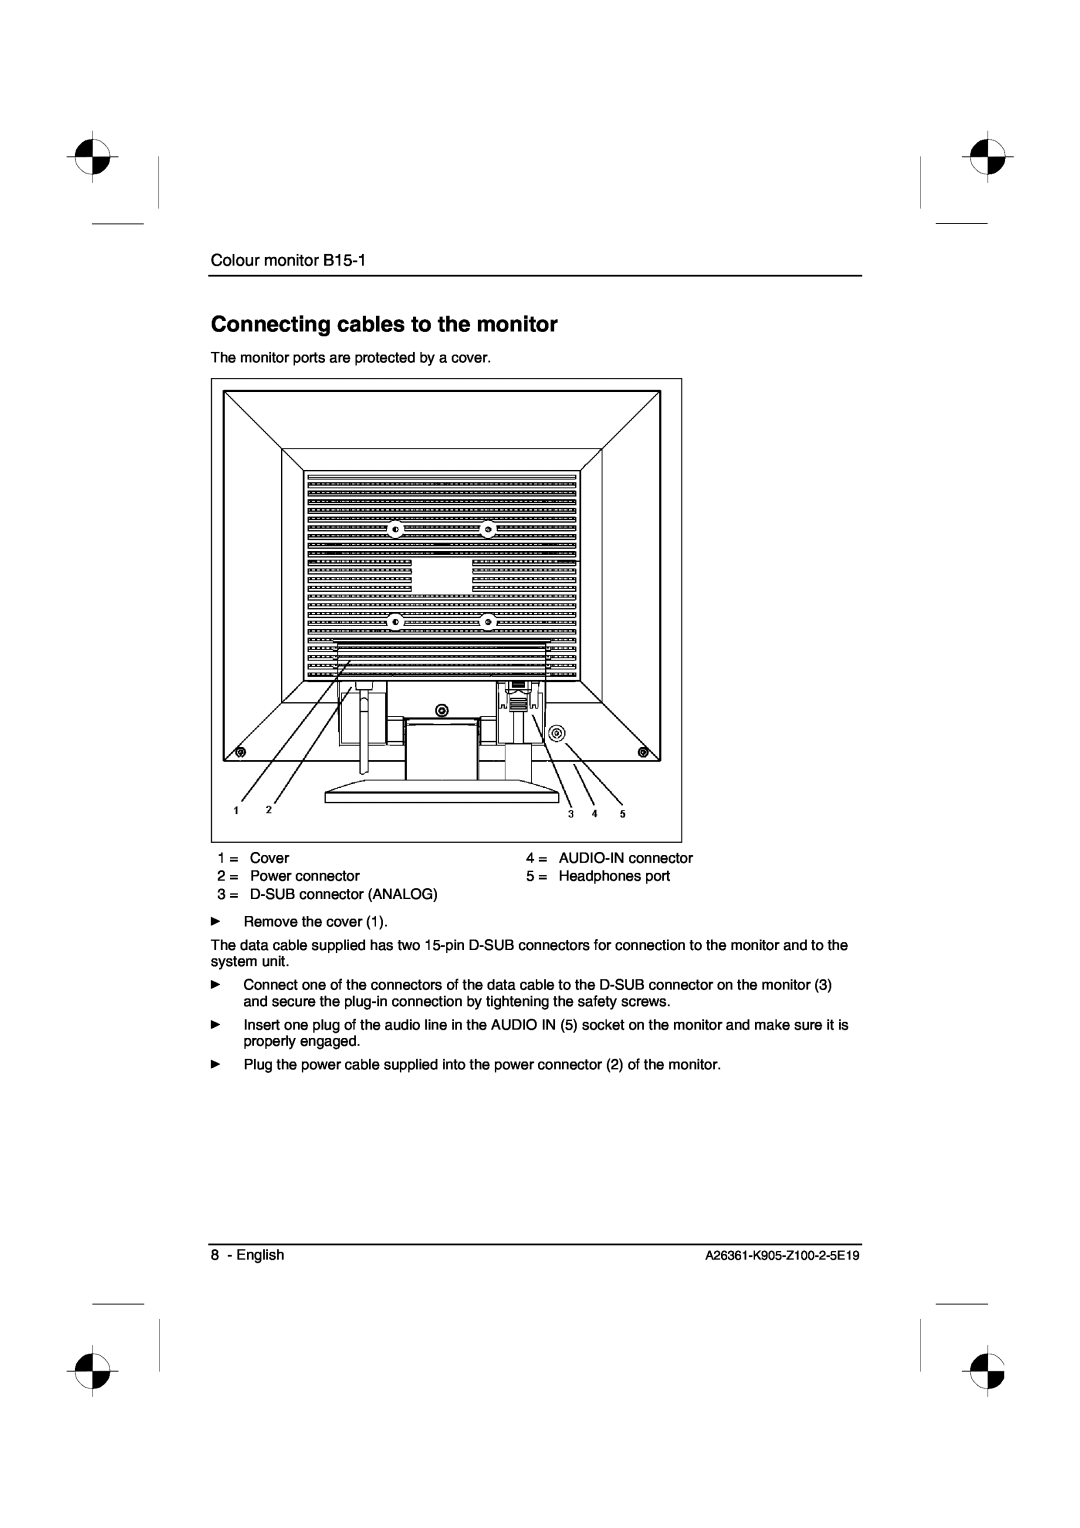 Fujitsu Siemens Computers manual Connecting cables to the monitor, Colour monitor B15-1 